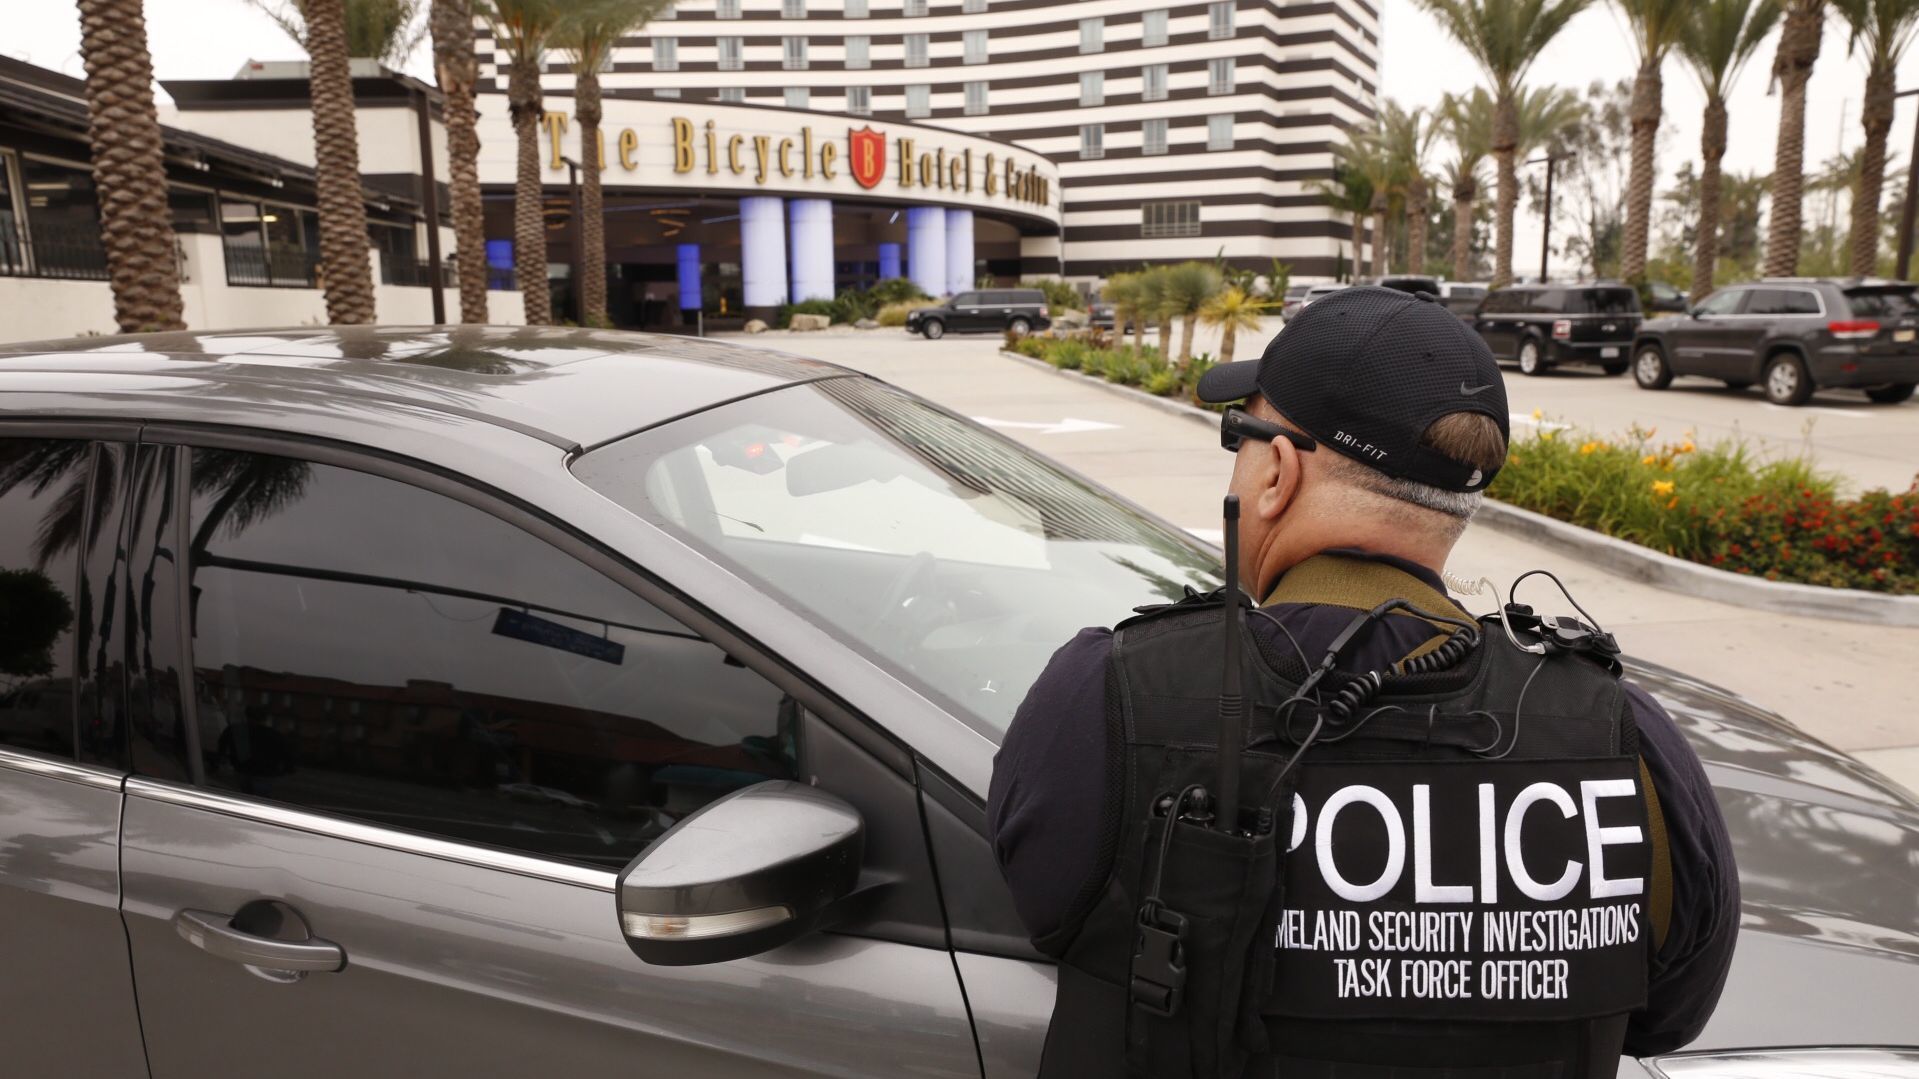 L.A.’s Bicycle Casino Reoopens Following Dramatic Tuesday Raid, ‘Criminal Fraud’ Investigation Underway